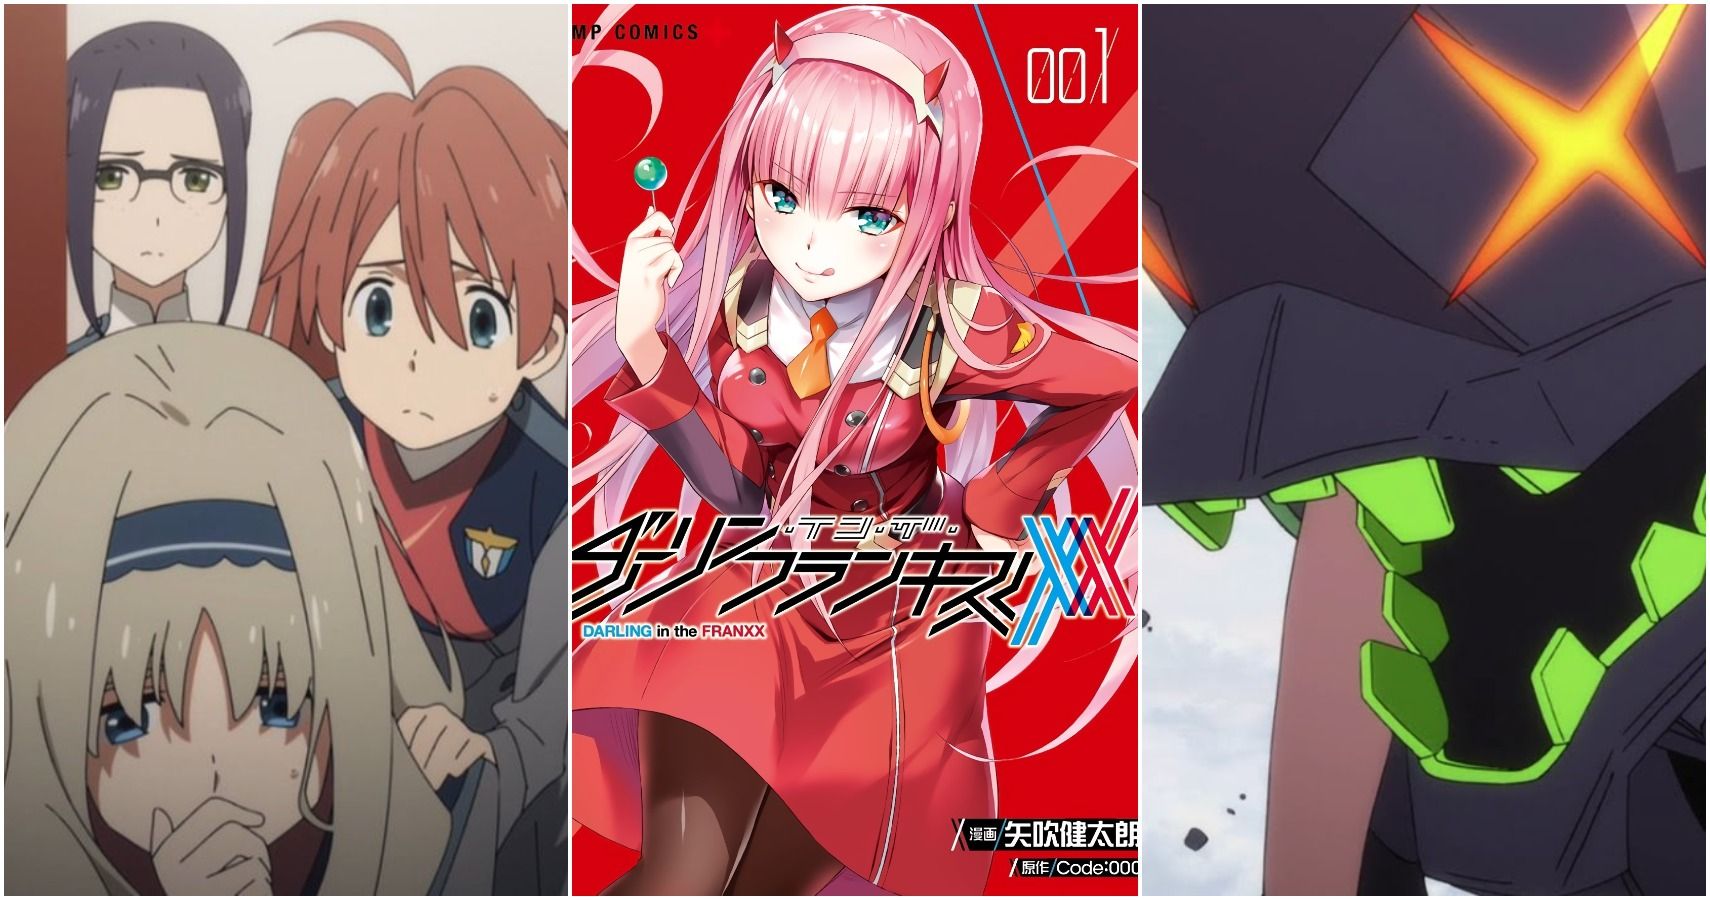 Darling In The Franxx: 10 Things You Never Knew About The Anime